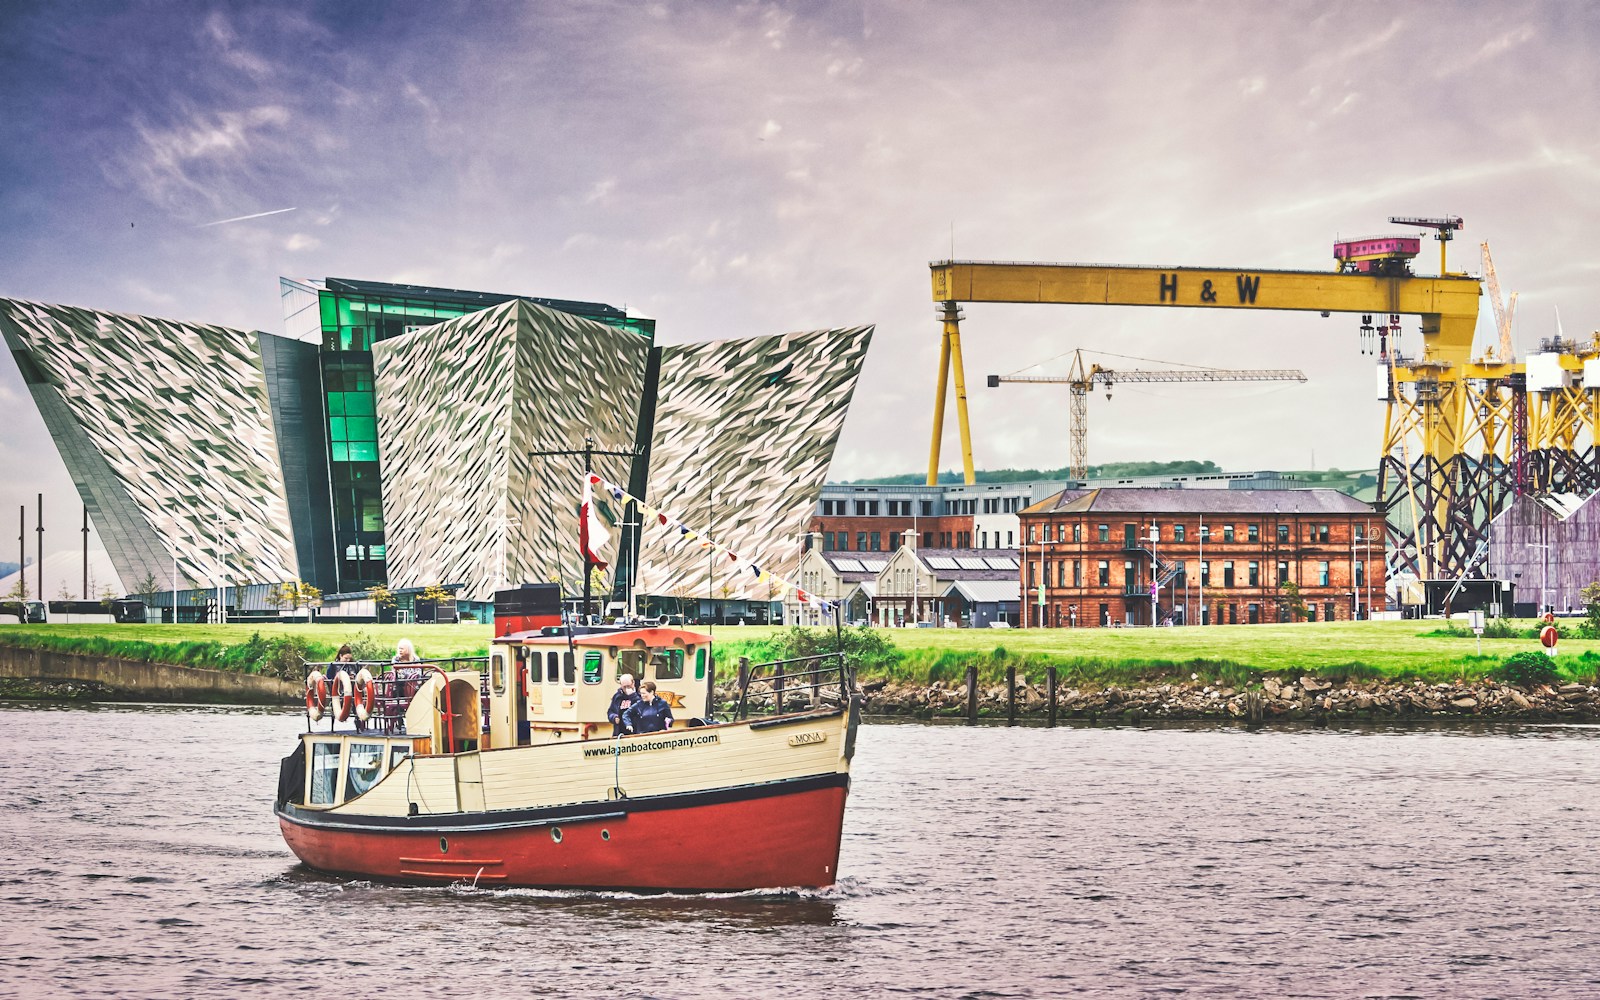 Belfast red and white boat on water near green and white building during daytime